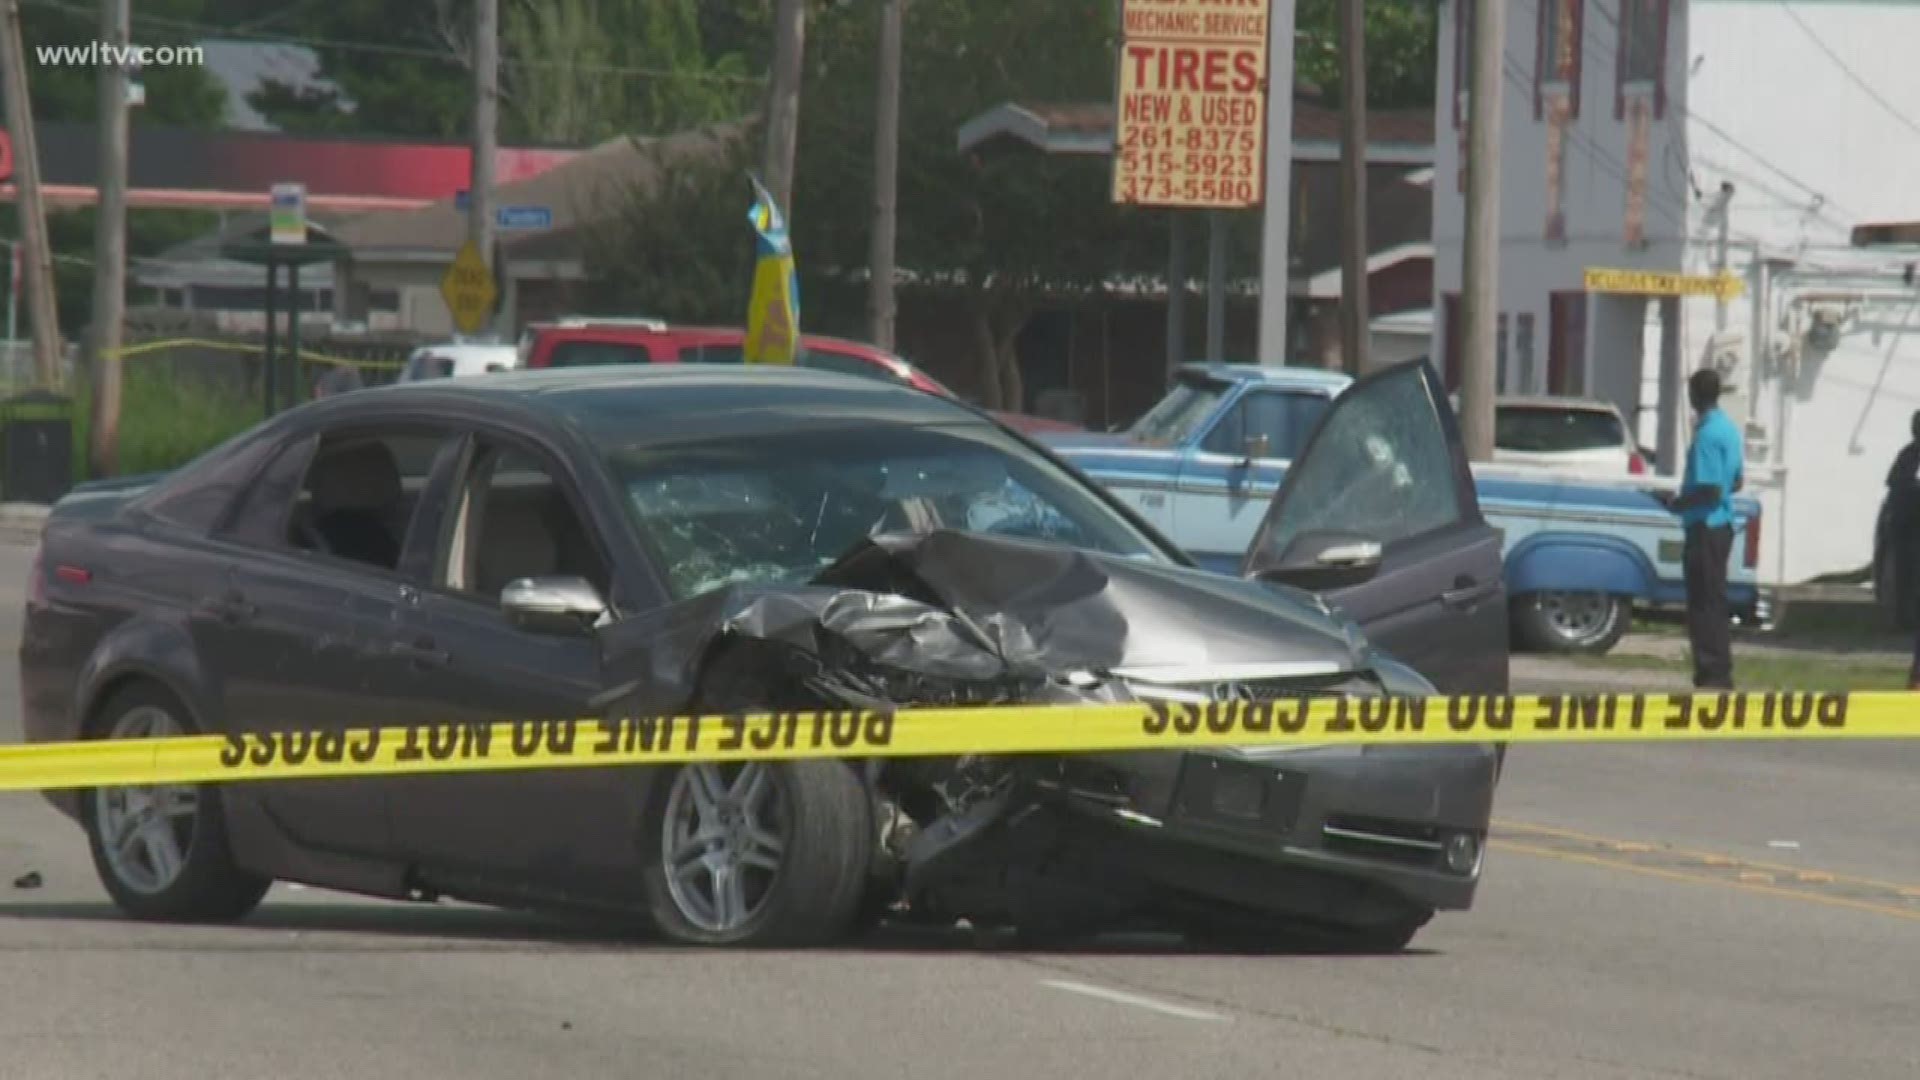 Police are investigating an apparent car-to-car shootout that left a man dead and two others seriously injured on General Meyer Avenue in Algiers Tuesday afternoon.